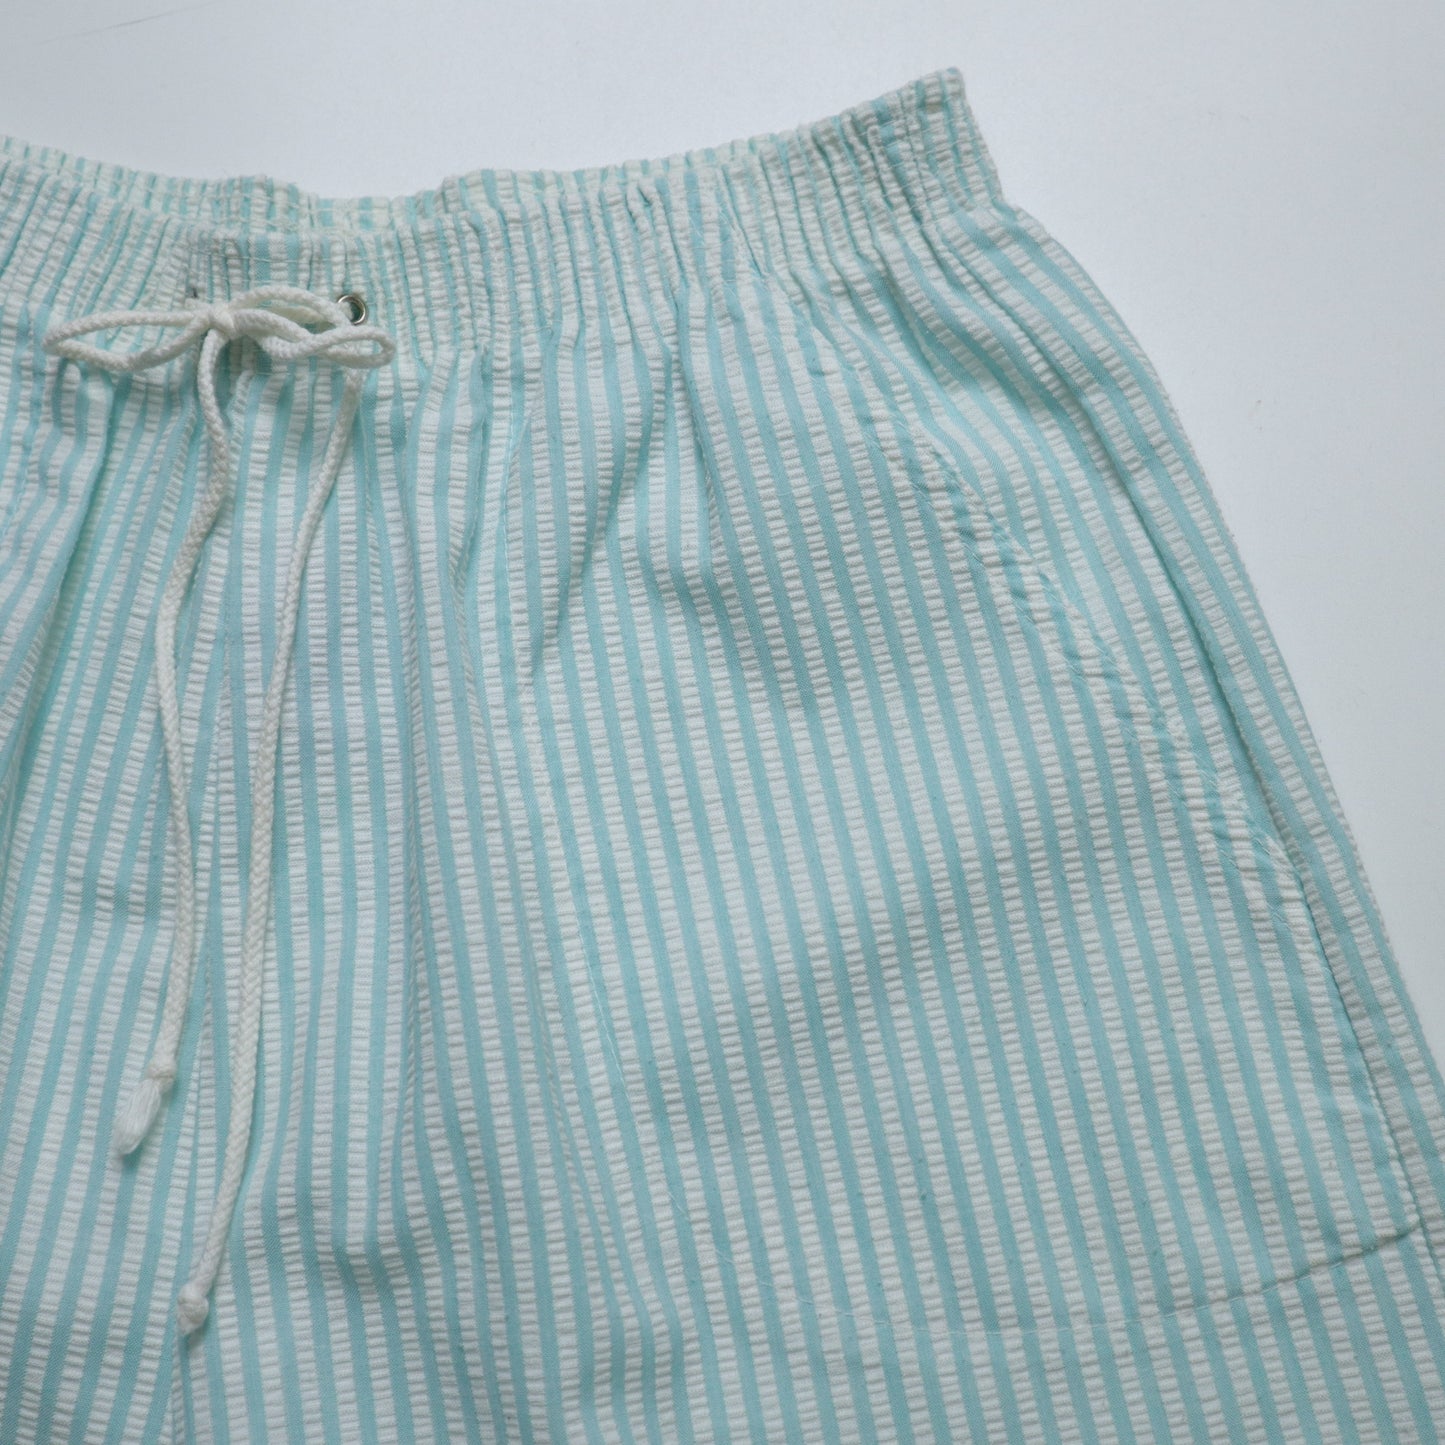 1980s American-made blue and white three-dimensional striped shorts